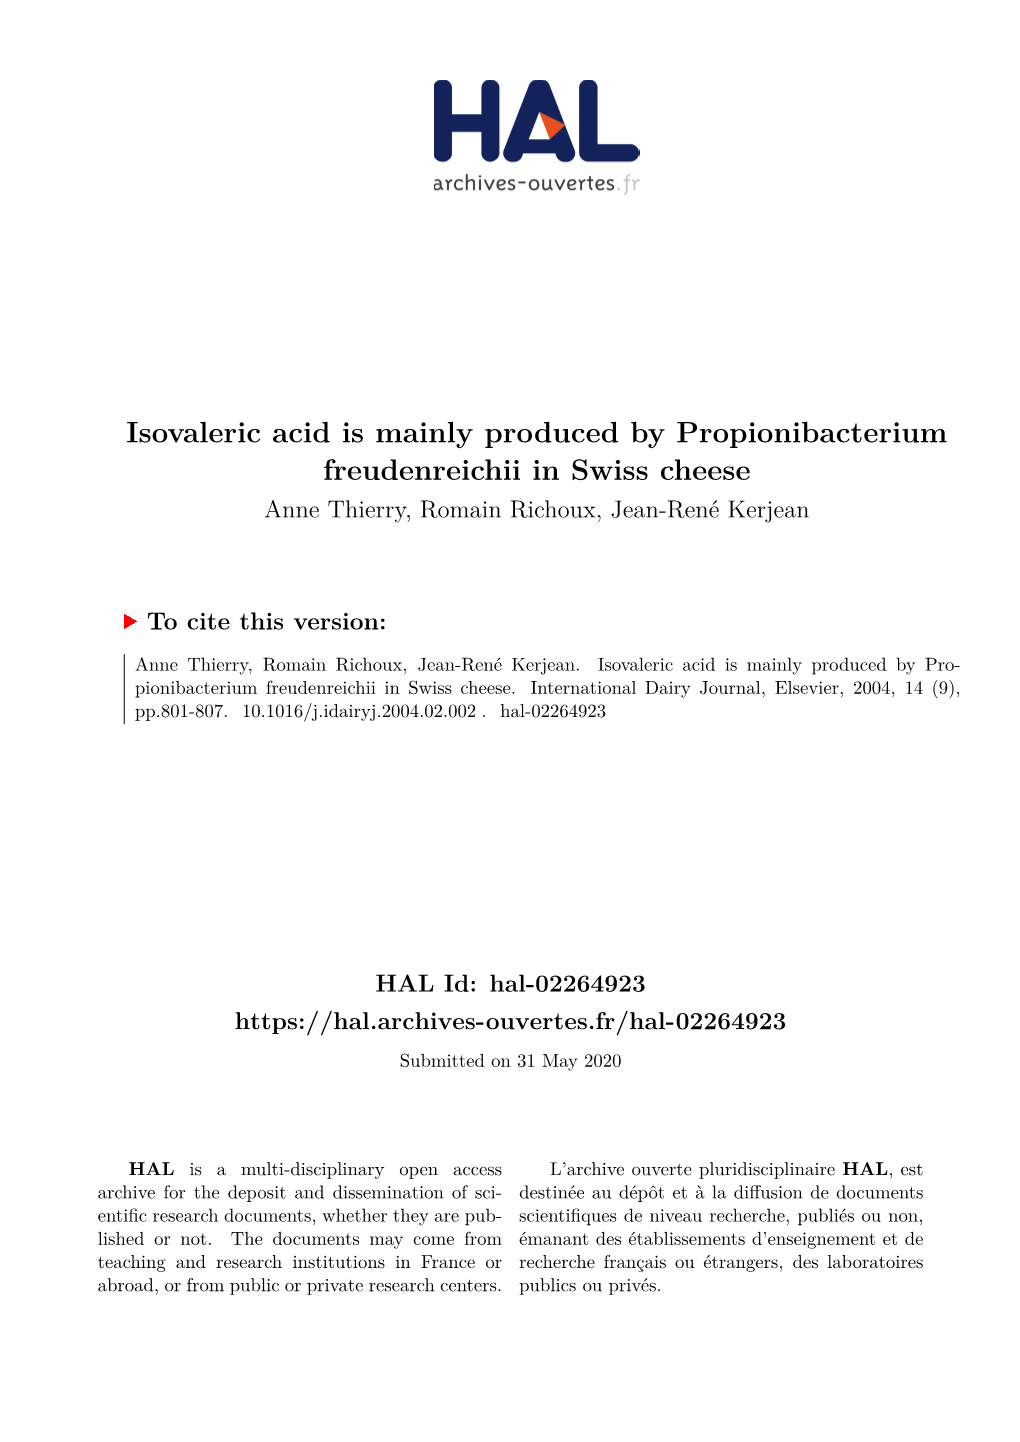 Isovaleric Acid Is Mainly Produced by Propionibacterium Freudenreichii in Swiss Cheese Anne Thierry, Romain Richoux, Jean-René Kerjean